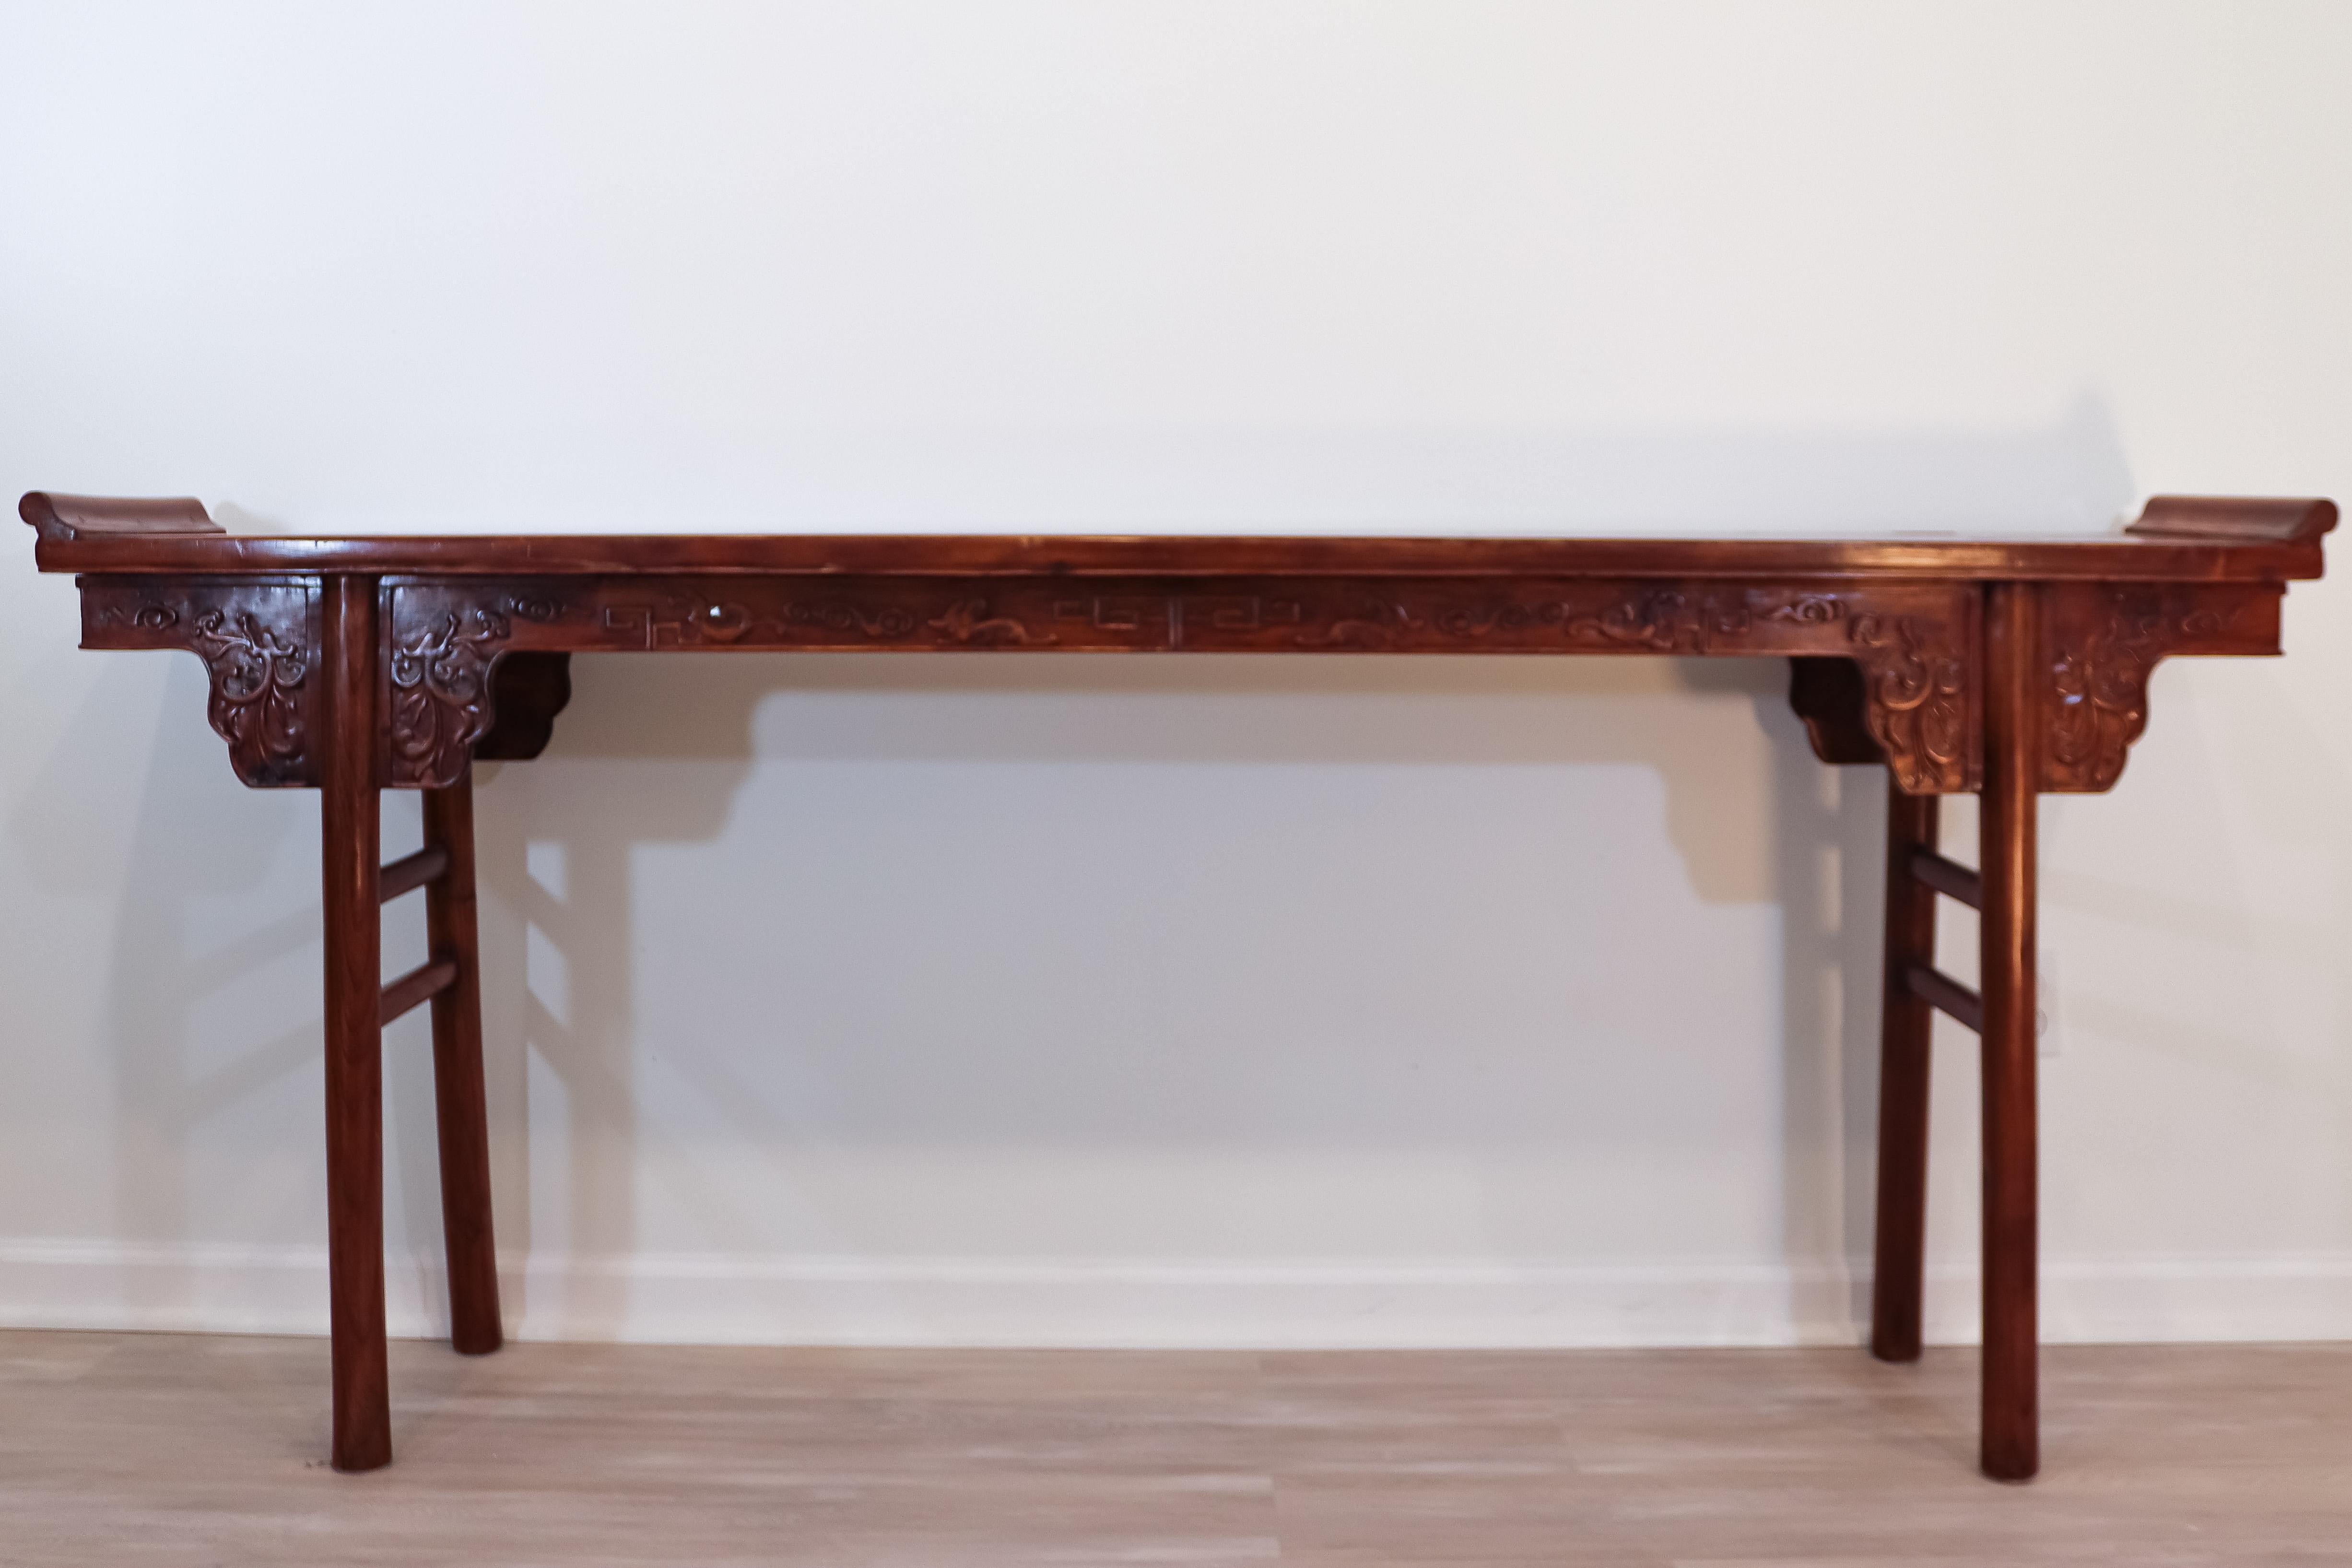 Fantastic Asian style alter table that would look stunning in any entry way or living space. The carved detail is contrasted by the simple, modern legs that would work well in any aesthetic.

In very good condition, with little or no imperfections.